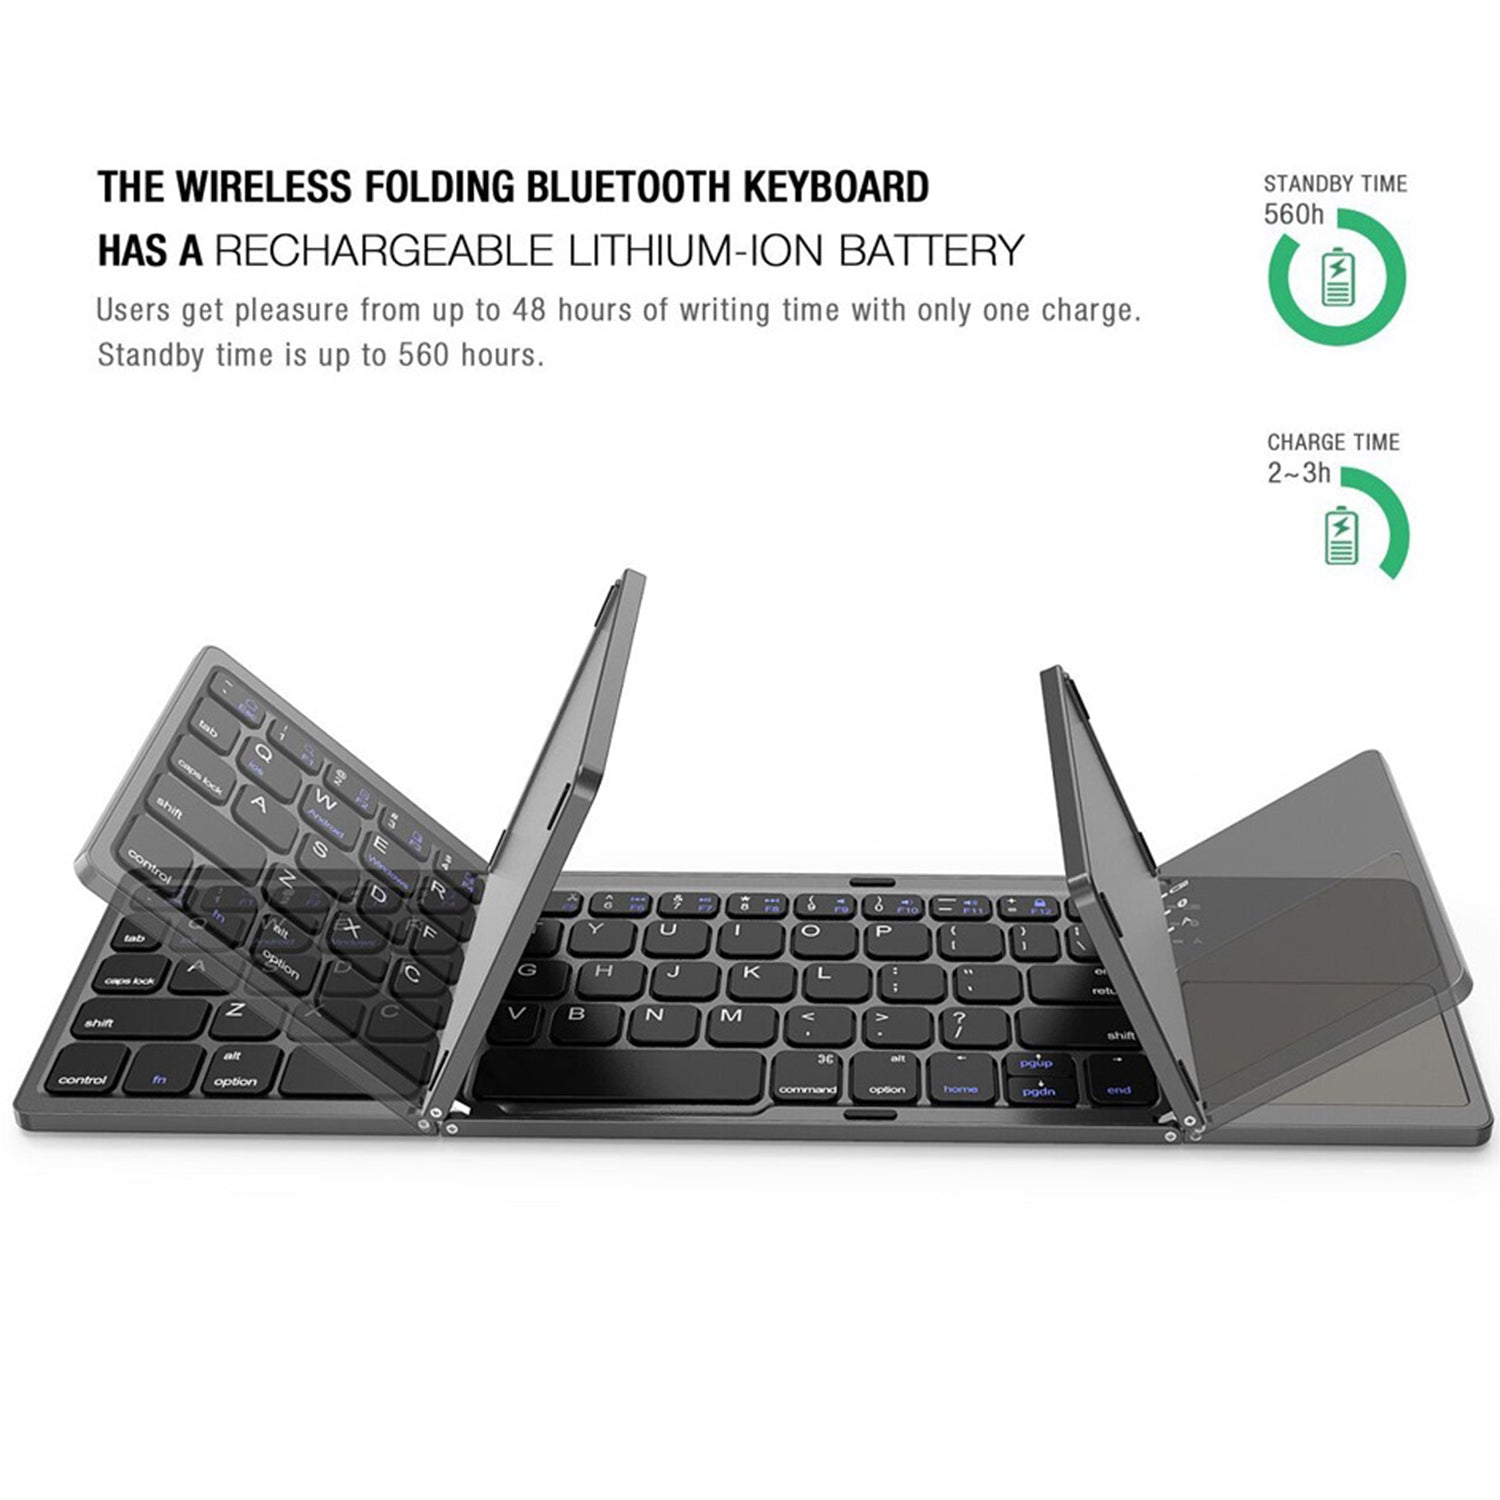 Portable Folding Wireless keyboard Bluetooth Rechargeable BT Touchpad Keypad for IOS/Android/Windows ipad Tablet-Black